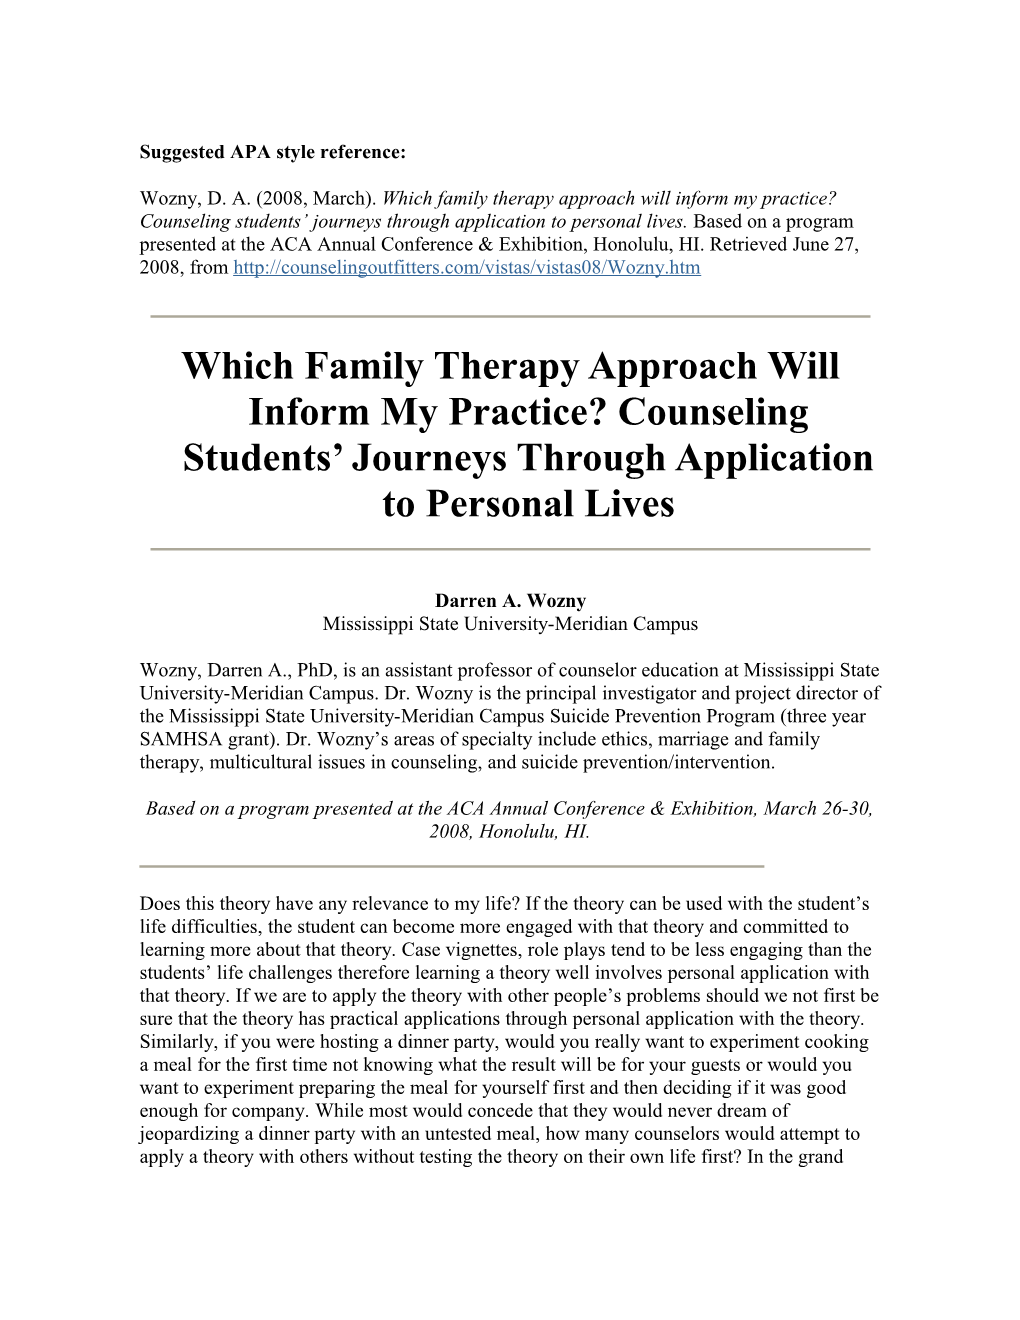 Which Family Therapy Approach Will Inform My Practice? Counseling Students Journeys Through